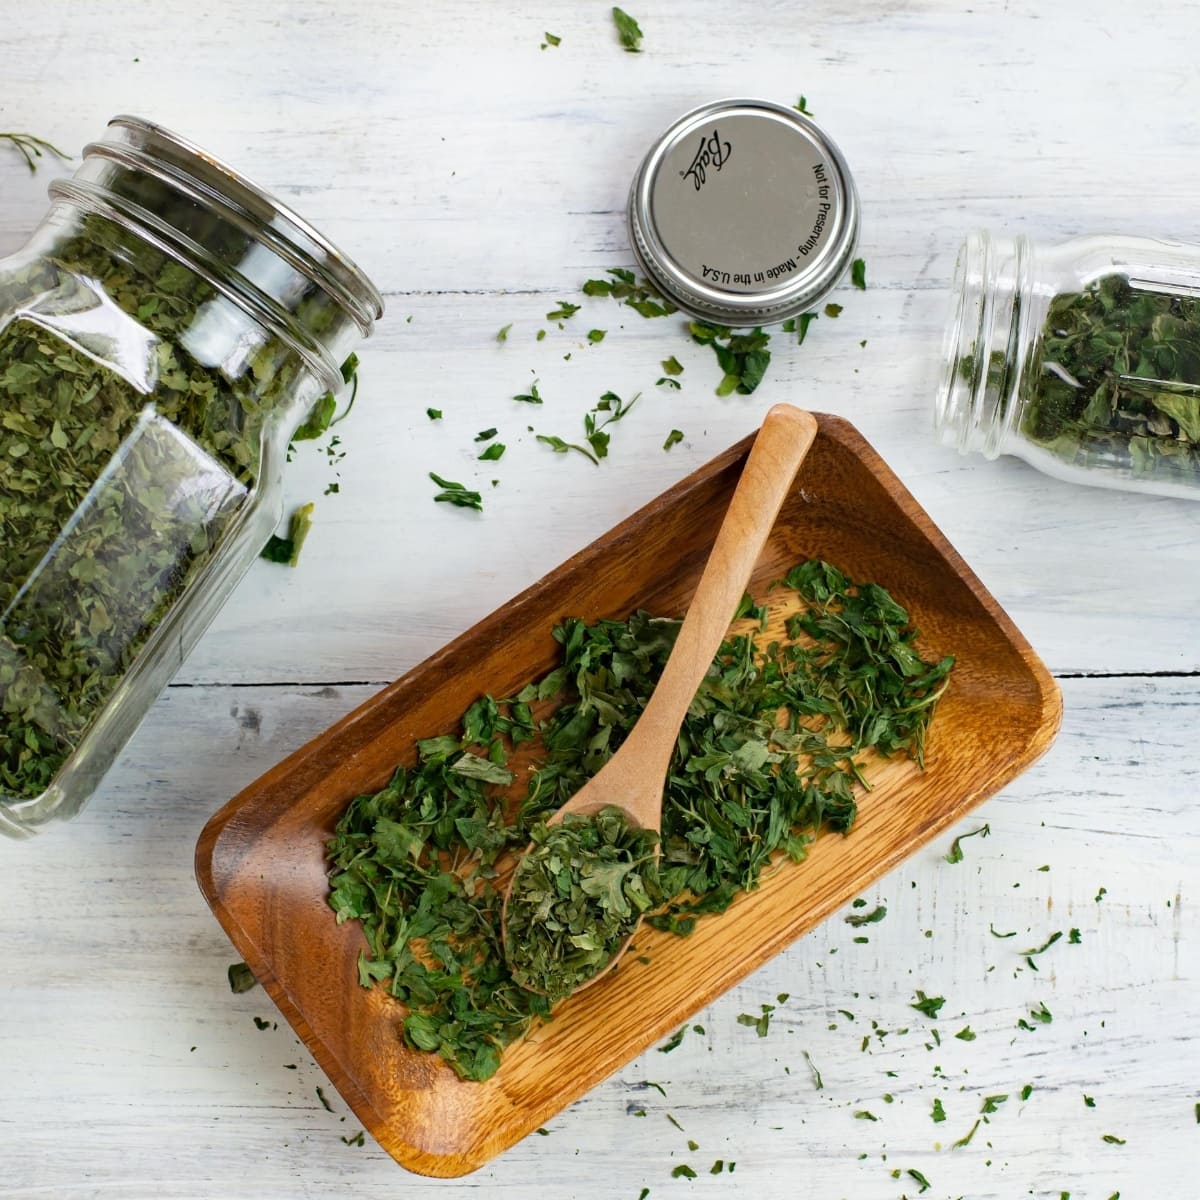 dehydrated parsley in a long wooden bowl with a small wooden spoon. In the background are two jars filled with dried parsley to show how to store the dried herb.